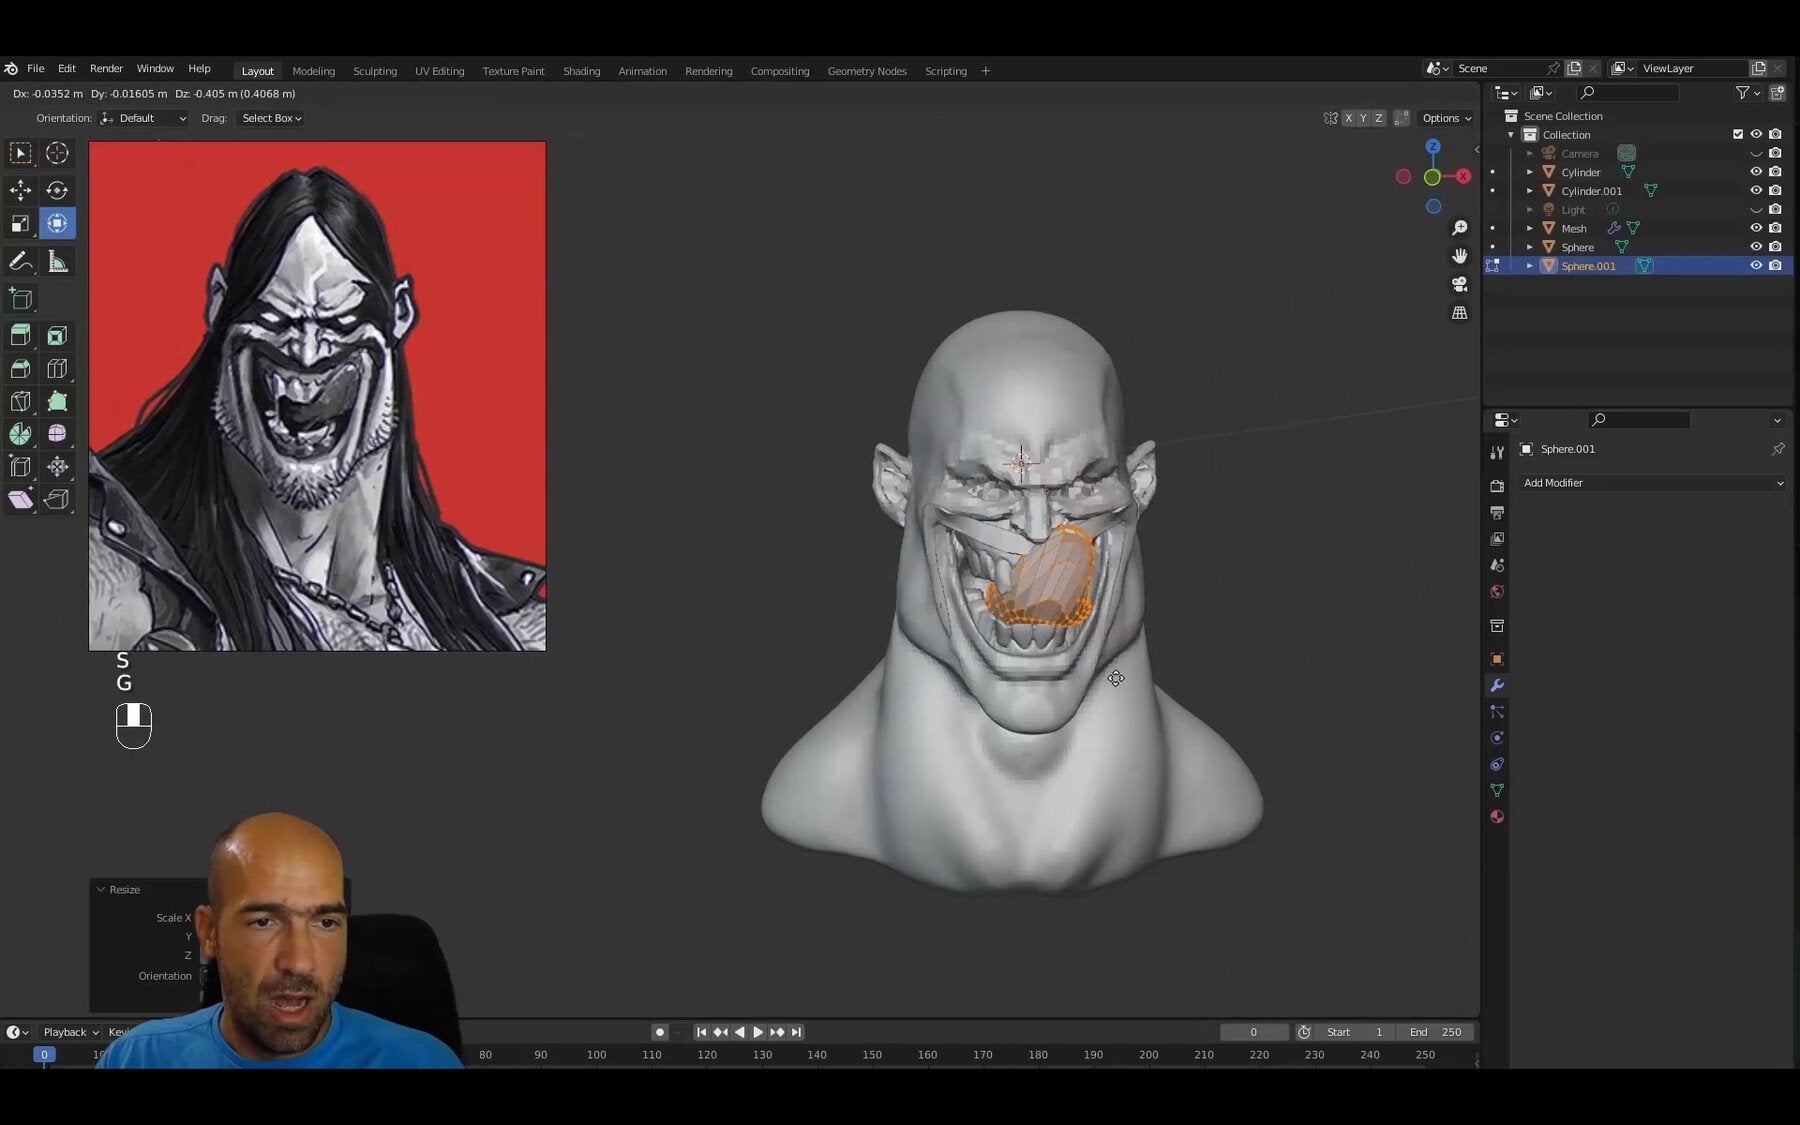 Lobo - 3D Character Creation in Blender Course